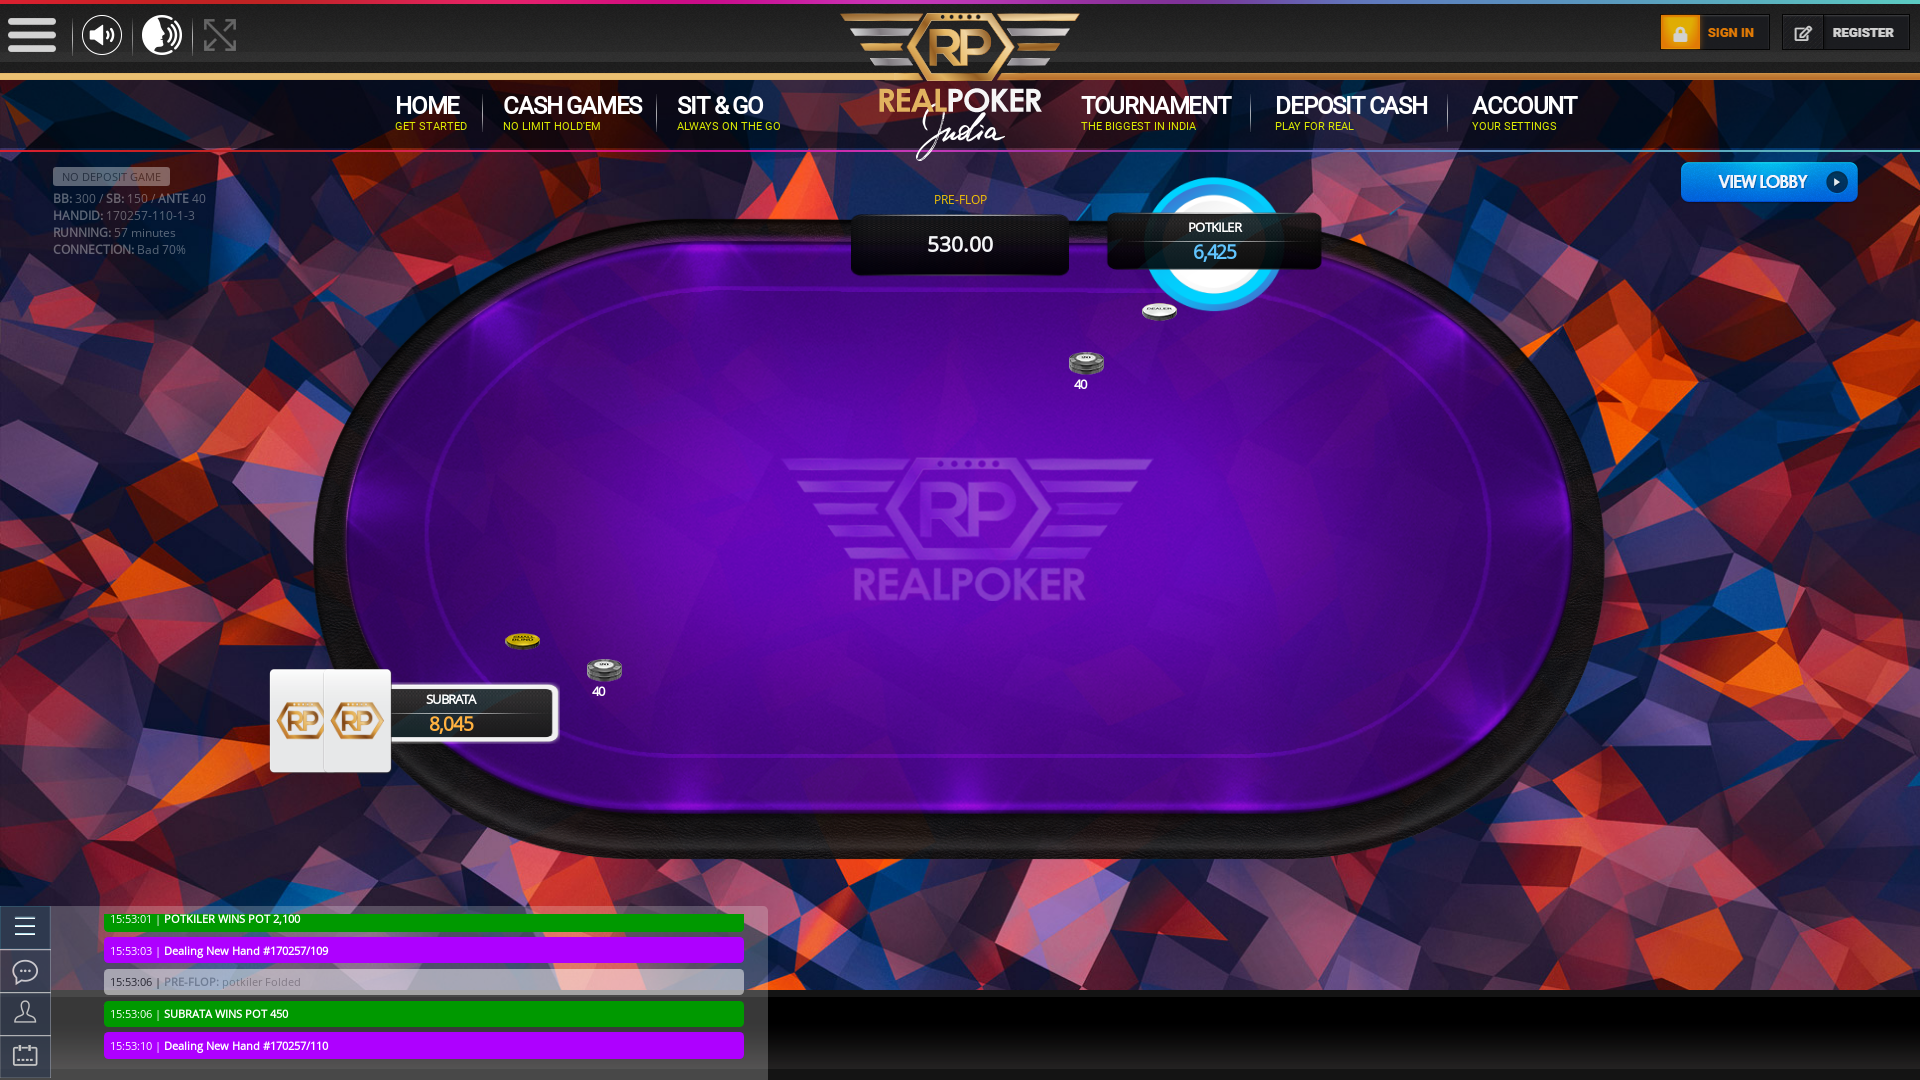 Curchorem Goa texas holdem poker table on a 10 player table in the 57th minute of the match